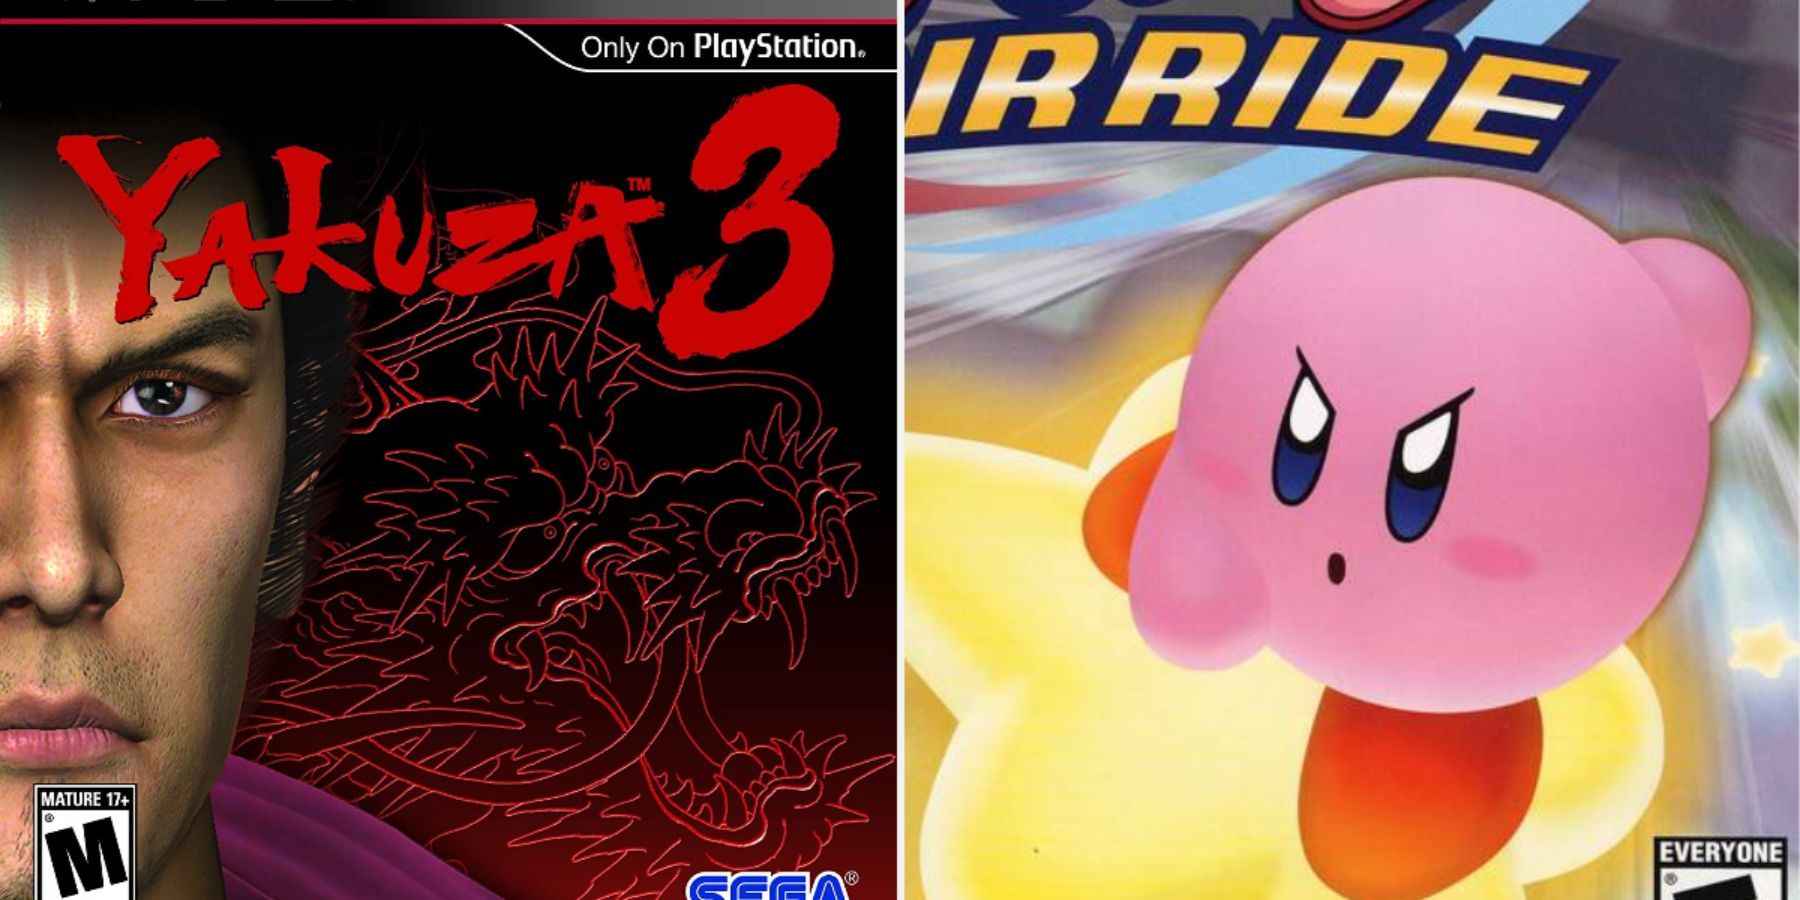 Japanese Games That Received Edgy Cover Art In America